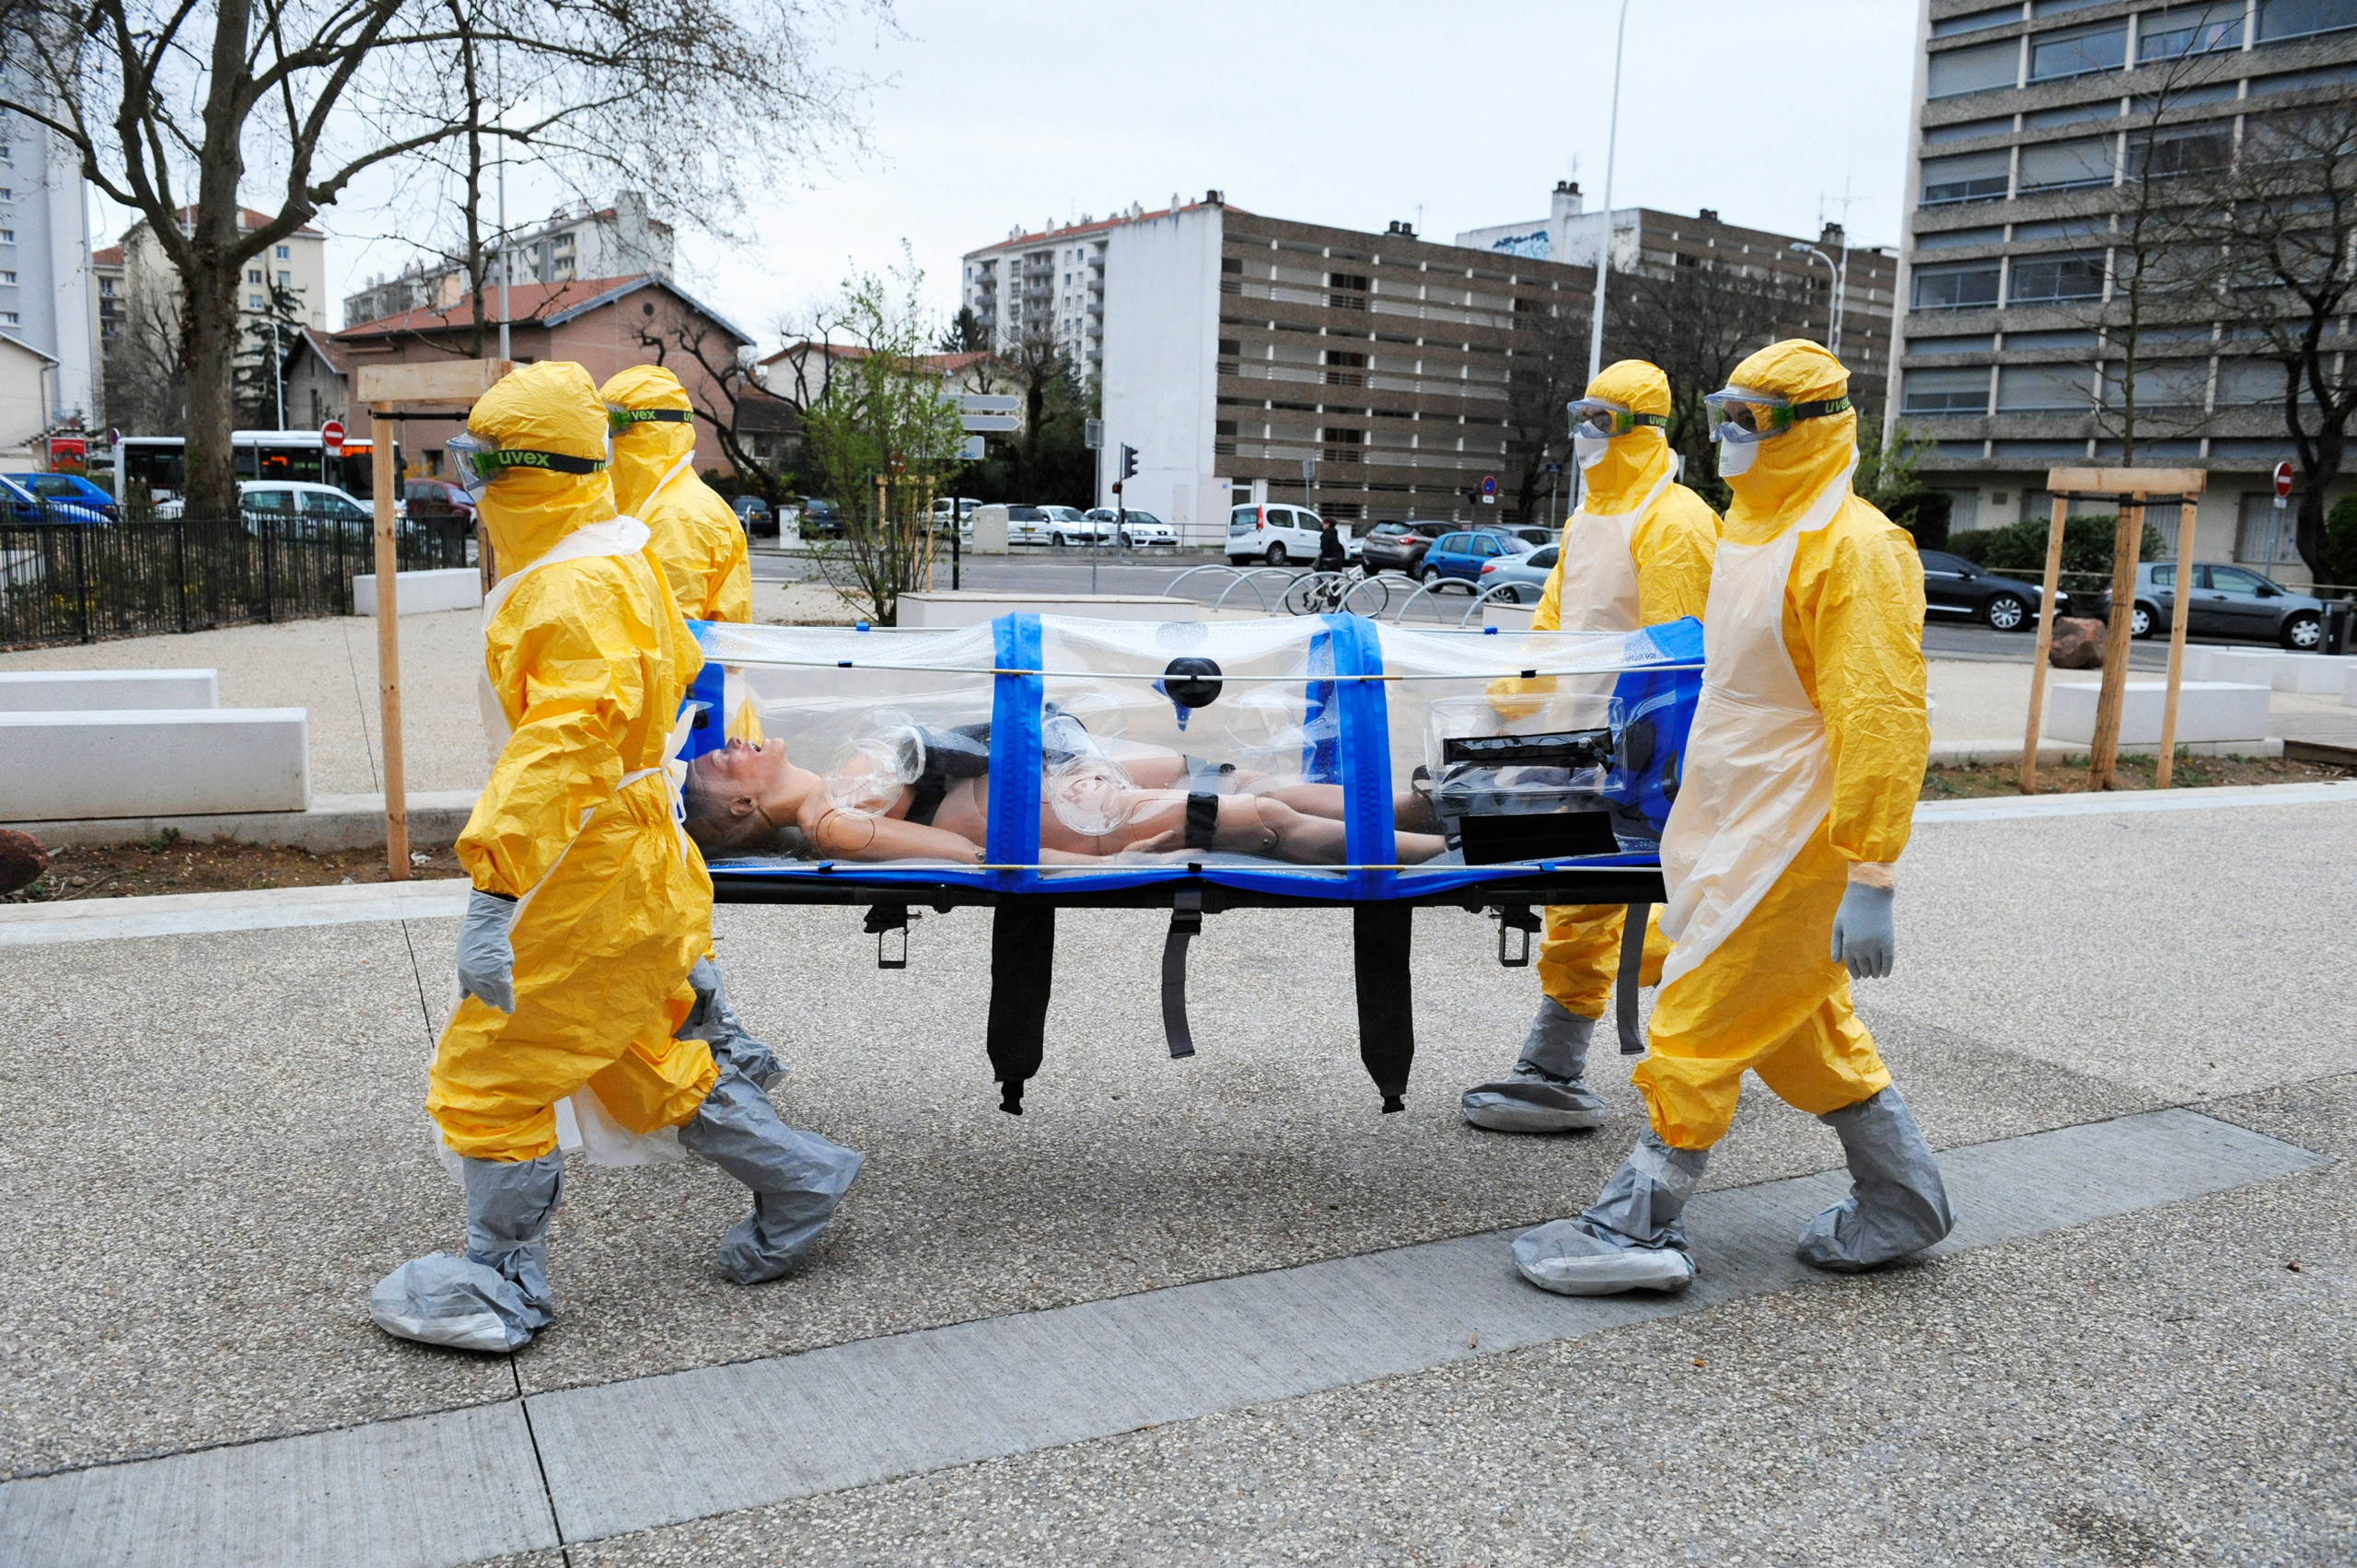 A dummy body is transported during an Ebola drill in Lyon, France, in 2015 (Laurent Cerino—REA/Redux)